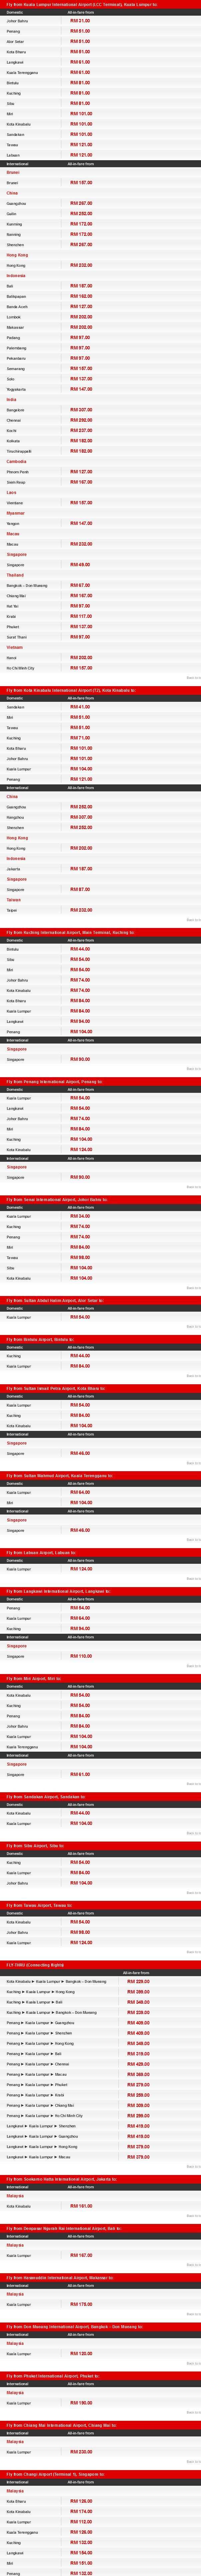 AirAsia Promotion from RM5 Fares Details